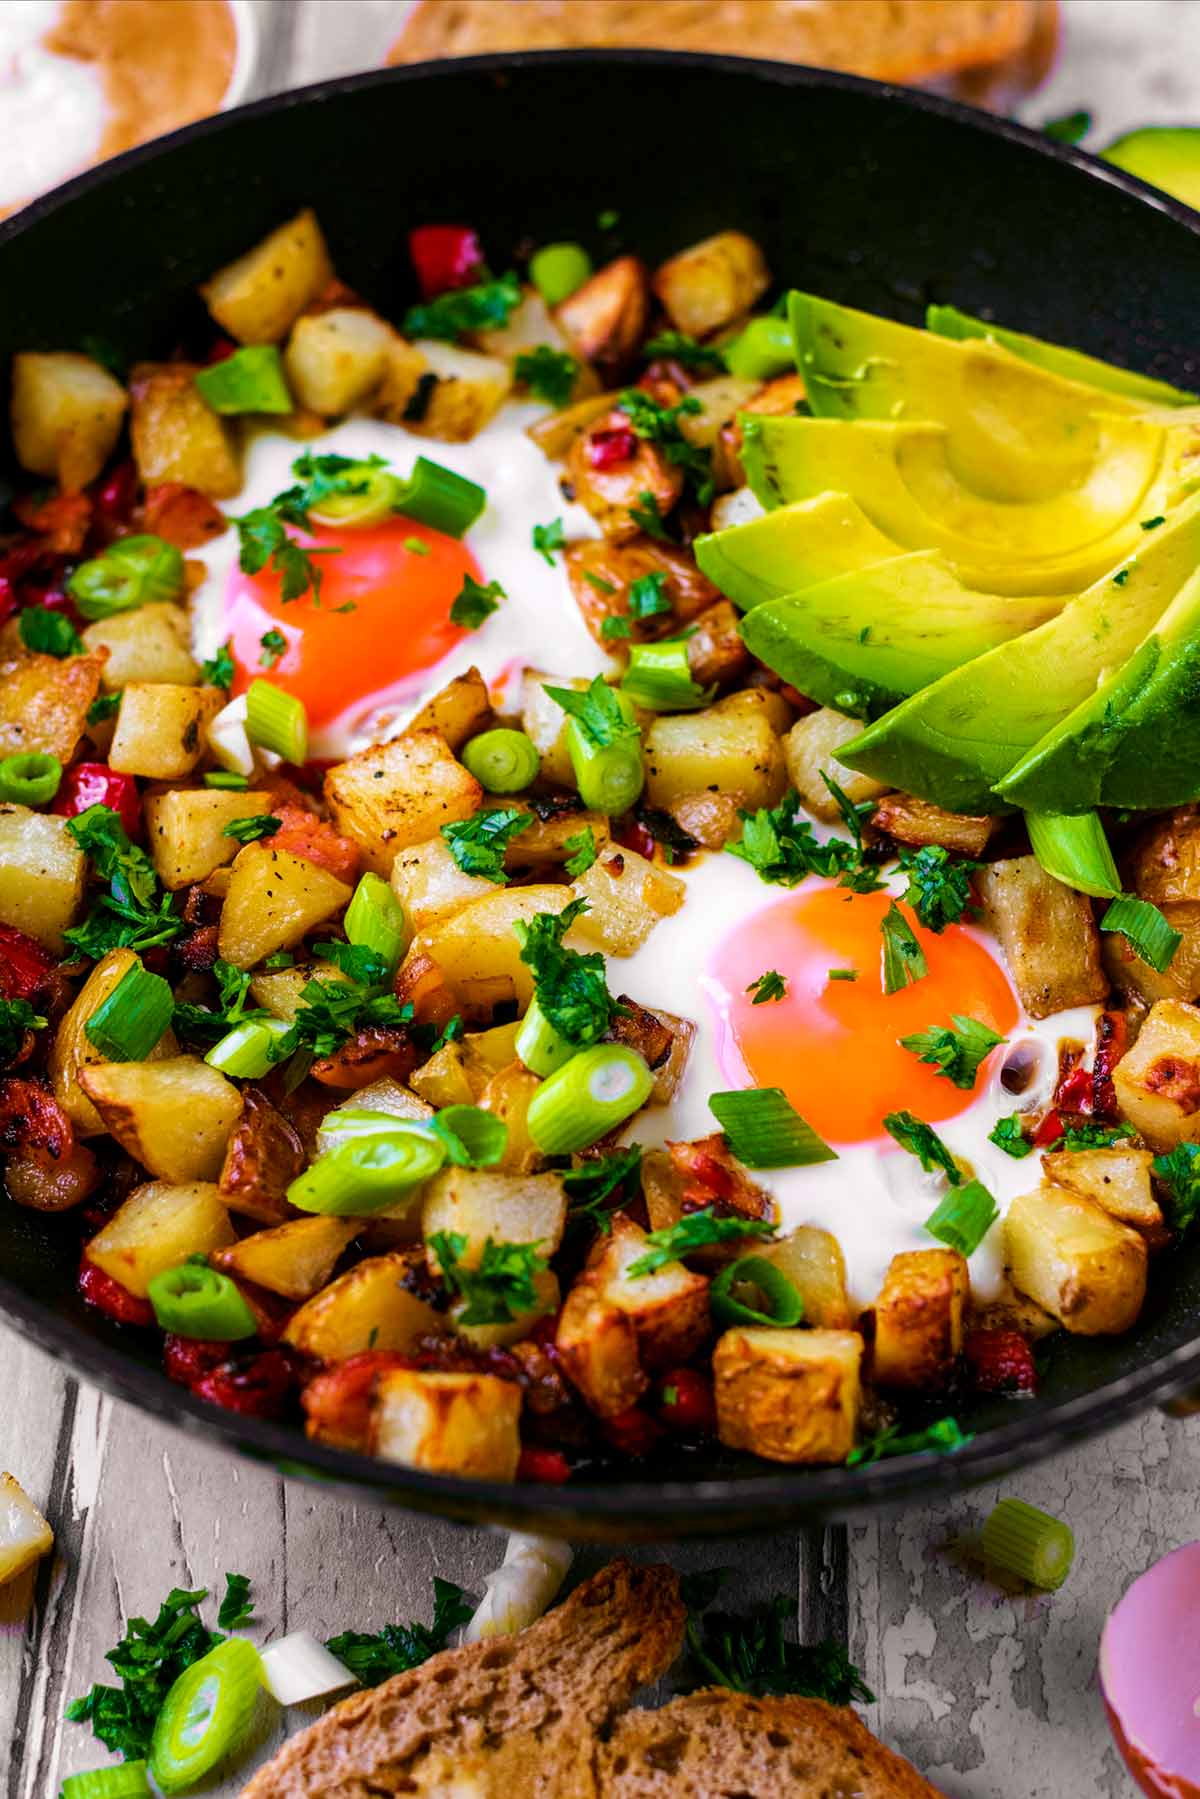 Breakfast hash in a frying pan topped with sliced avocado.